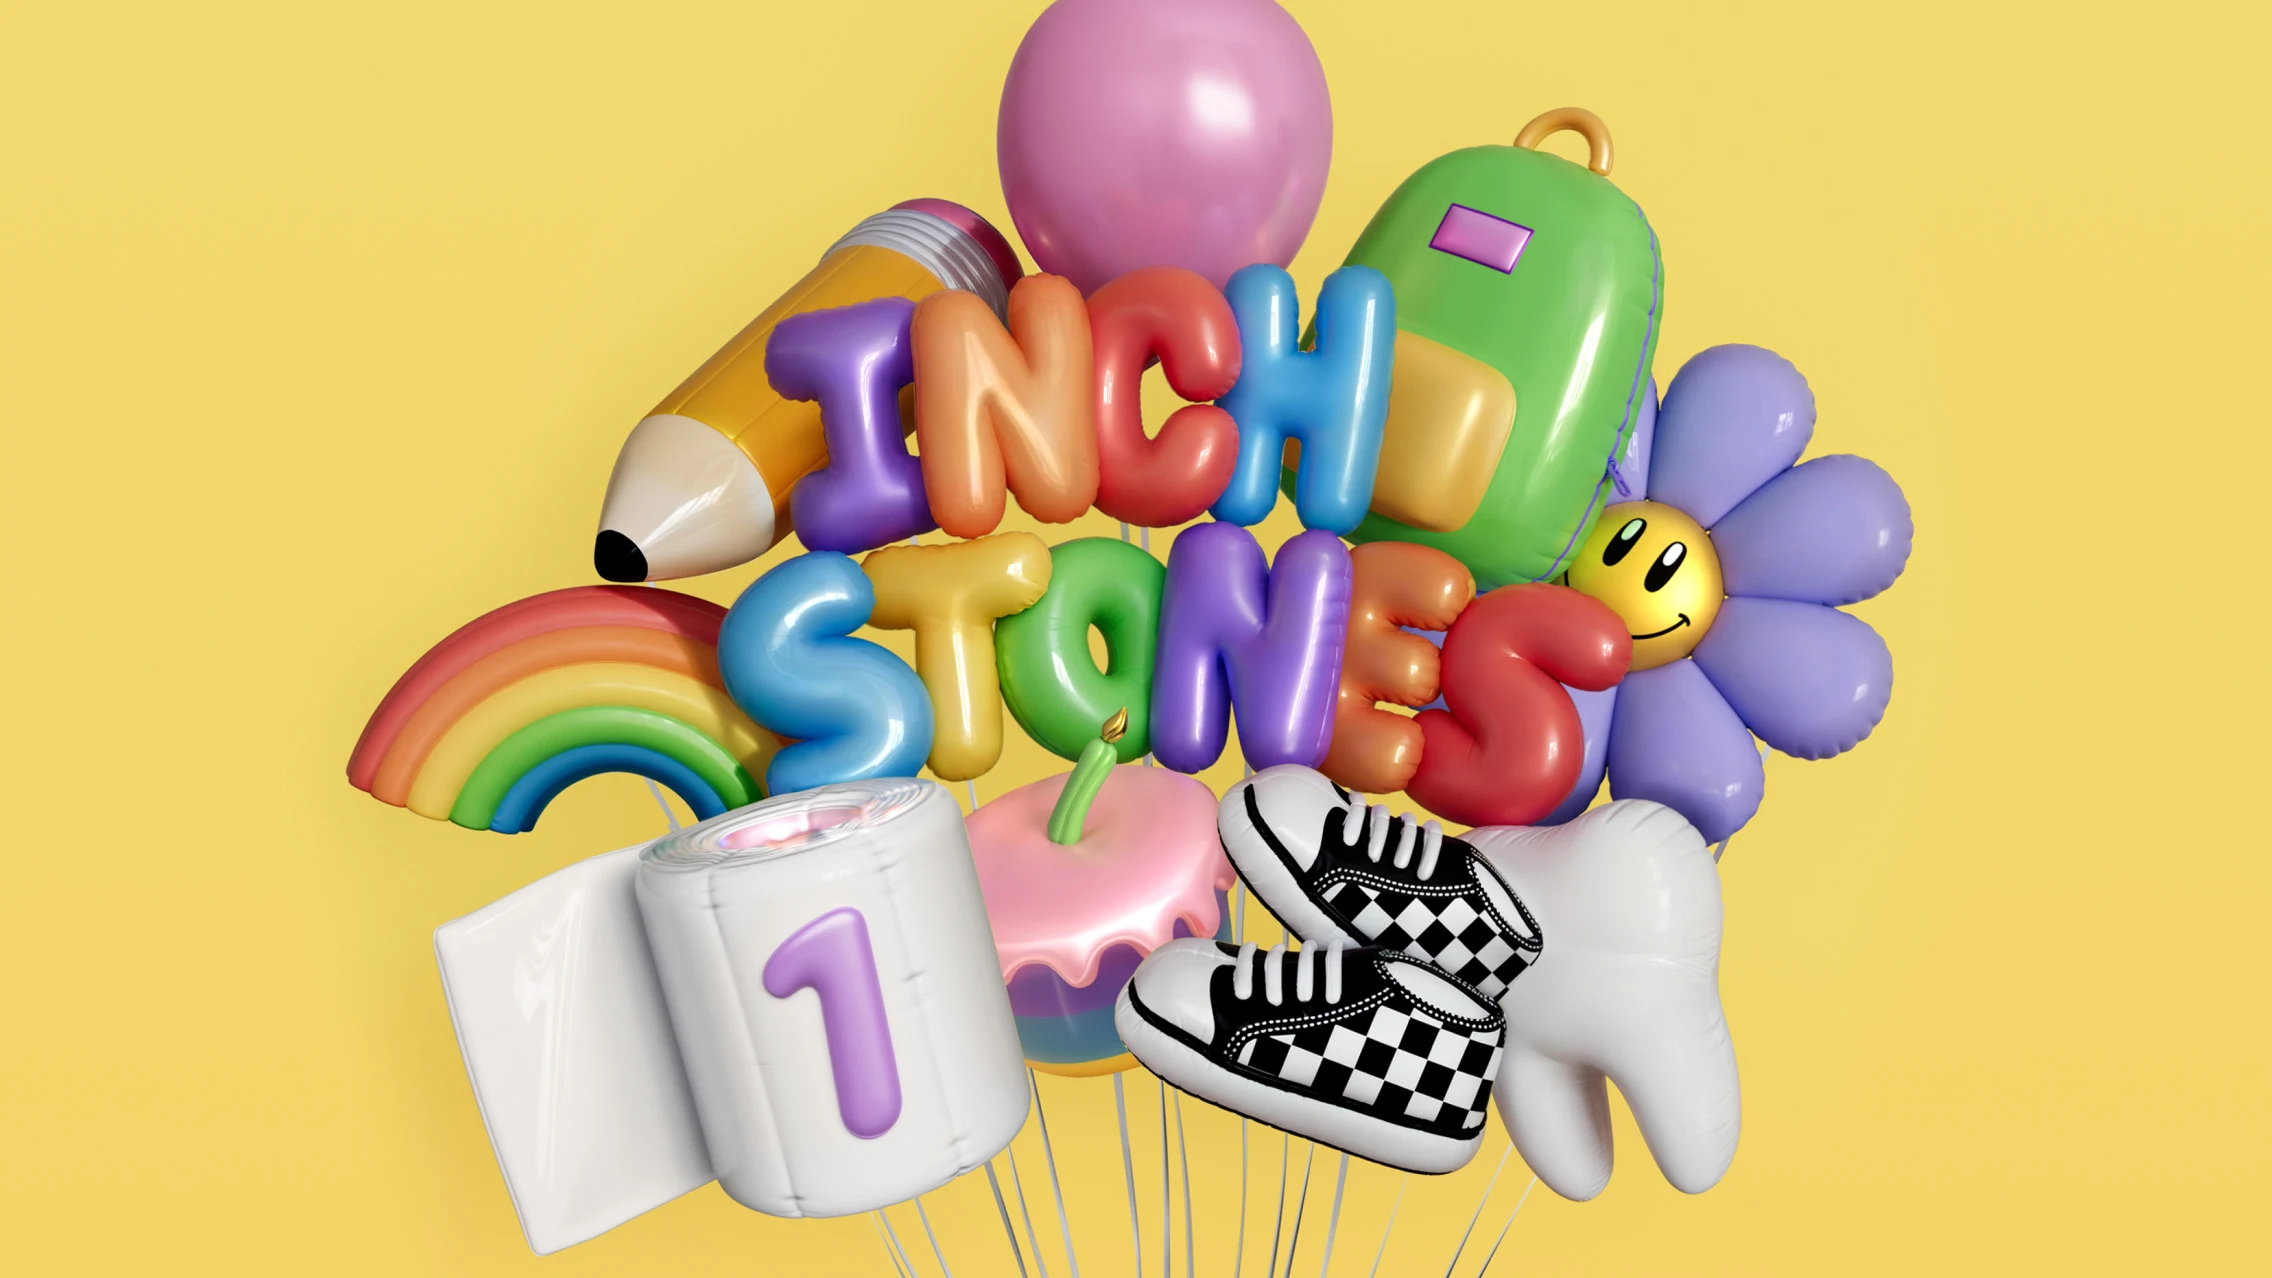 Colorful balloons in various shapes such as a pencil, rainbow, flower and more featured in front of a yellow background along with a roll of toilet paper and checkered sneakers. “Inchstones” is spelled out with balloons.